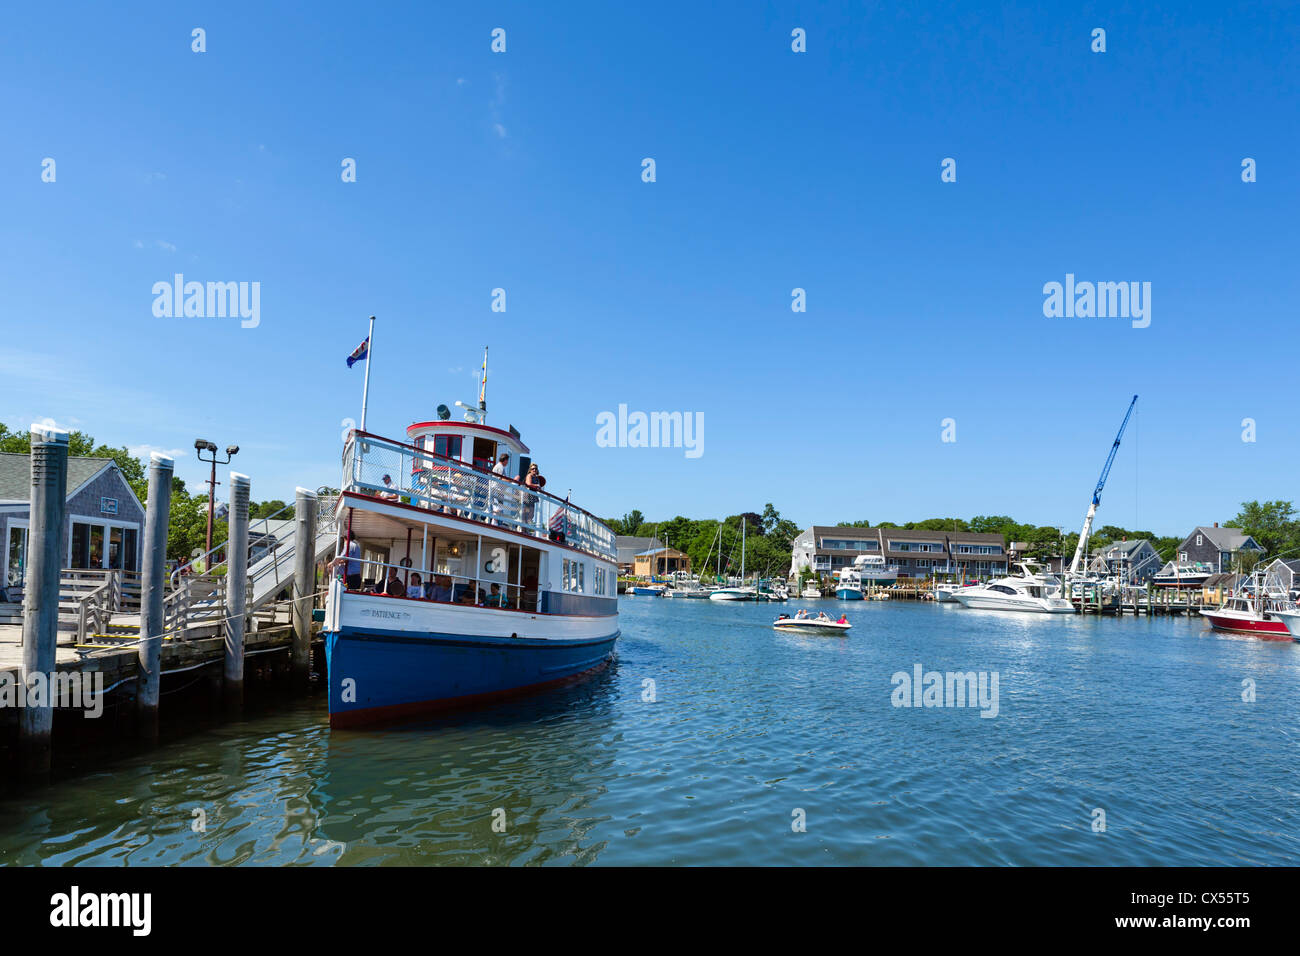 The Hy-Line cruise boat 'Patience' in the harbor at Hyannis, Barnstable, Cape Cod, Massachusetts, USA Stock Photo